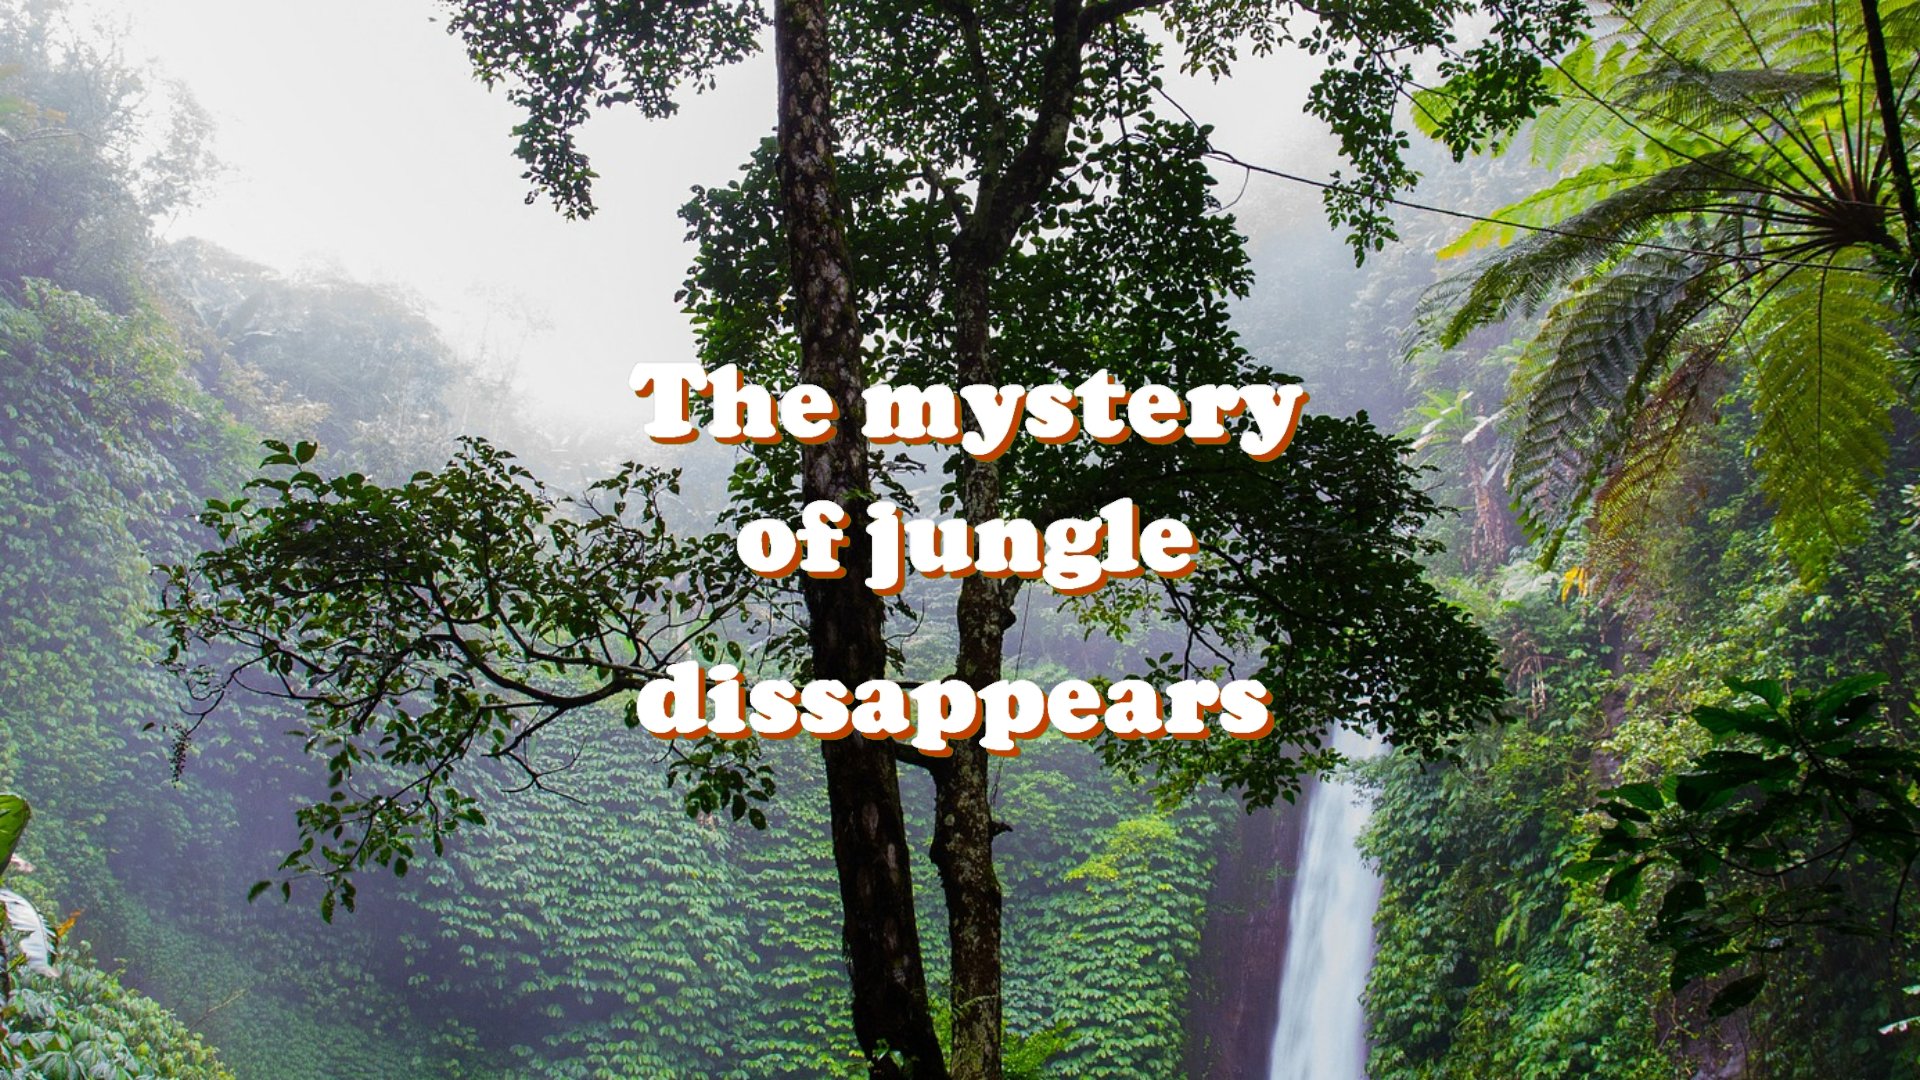 Mystery of jungle dissappears